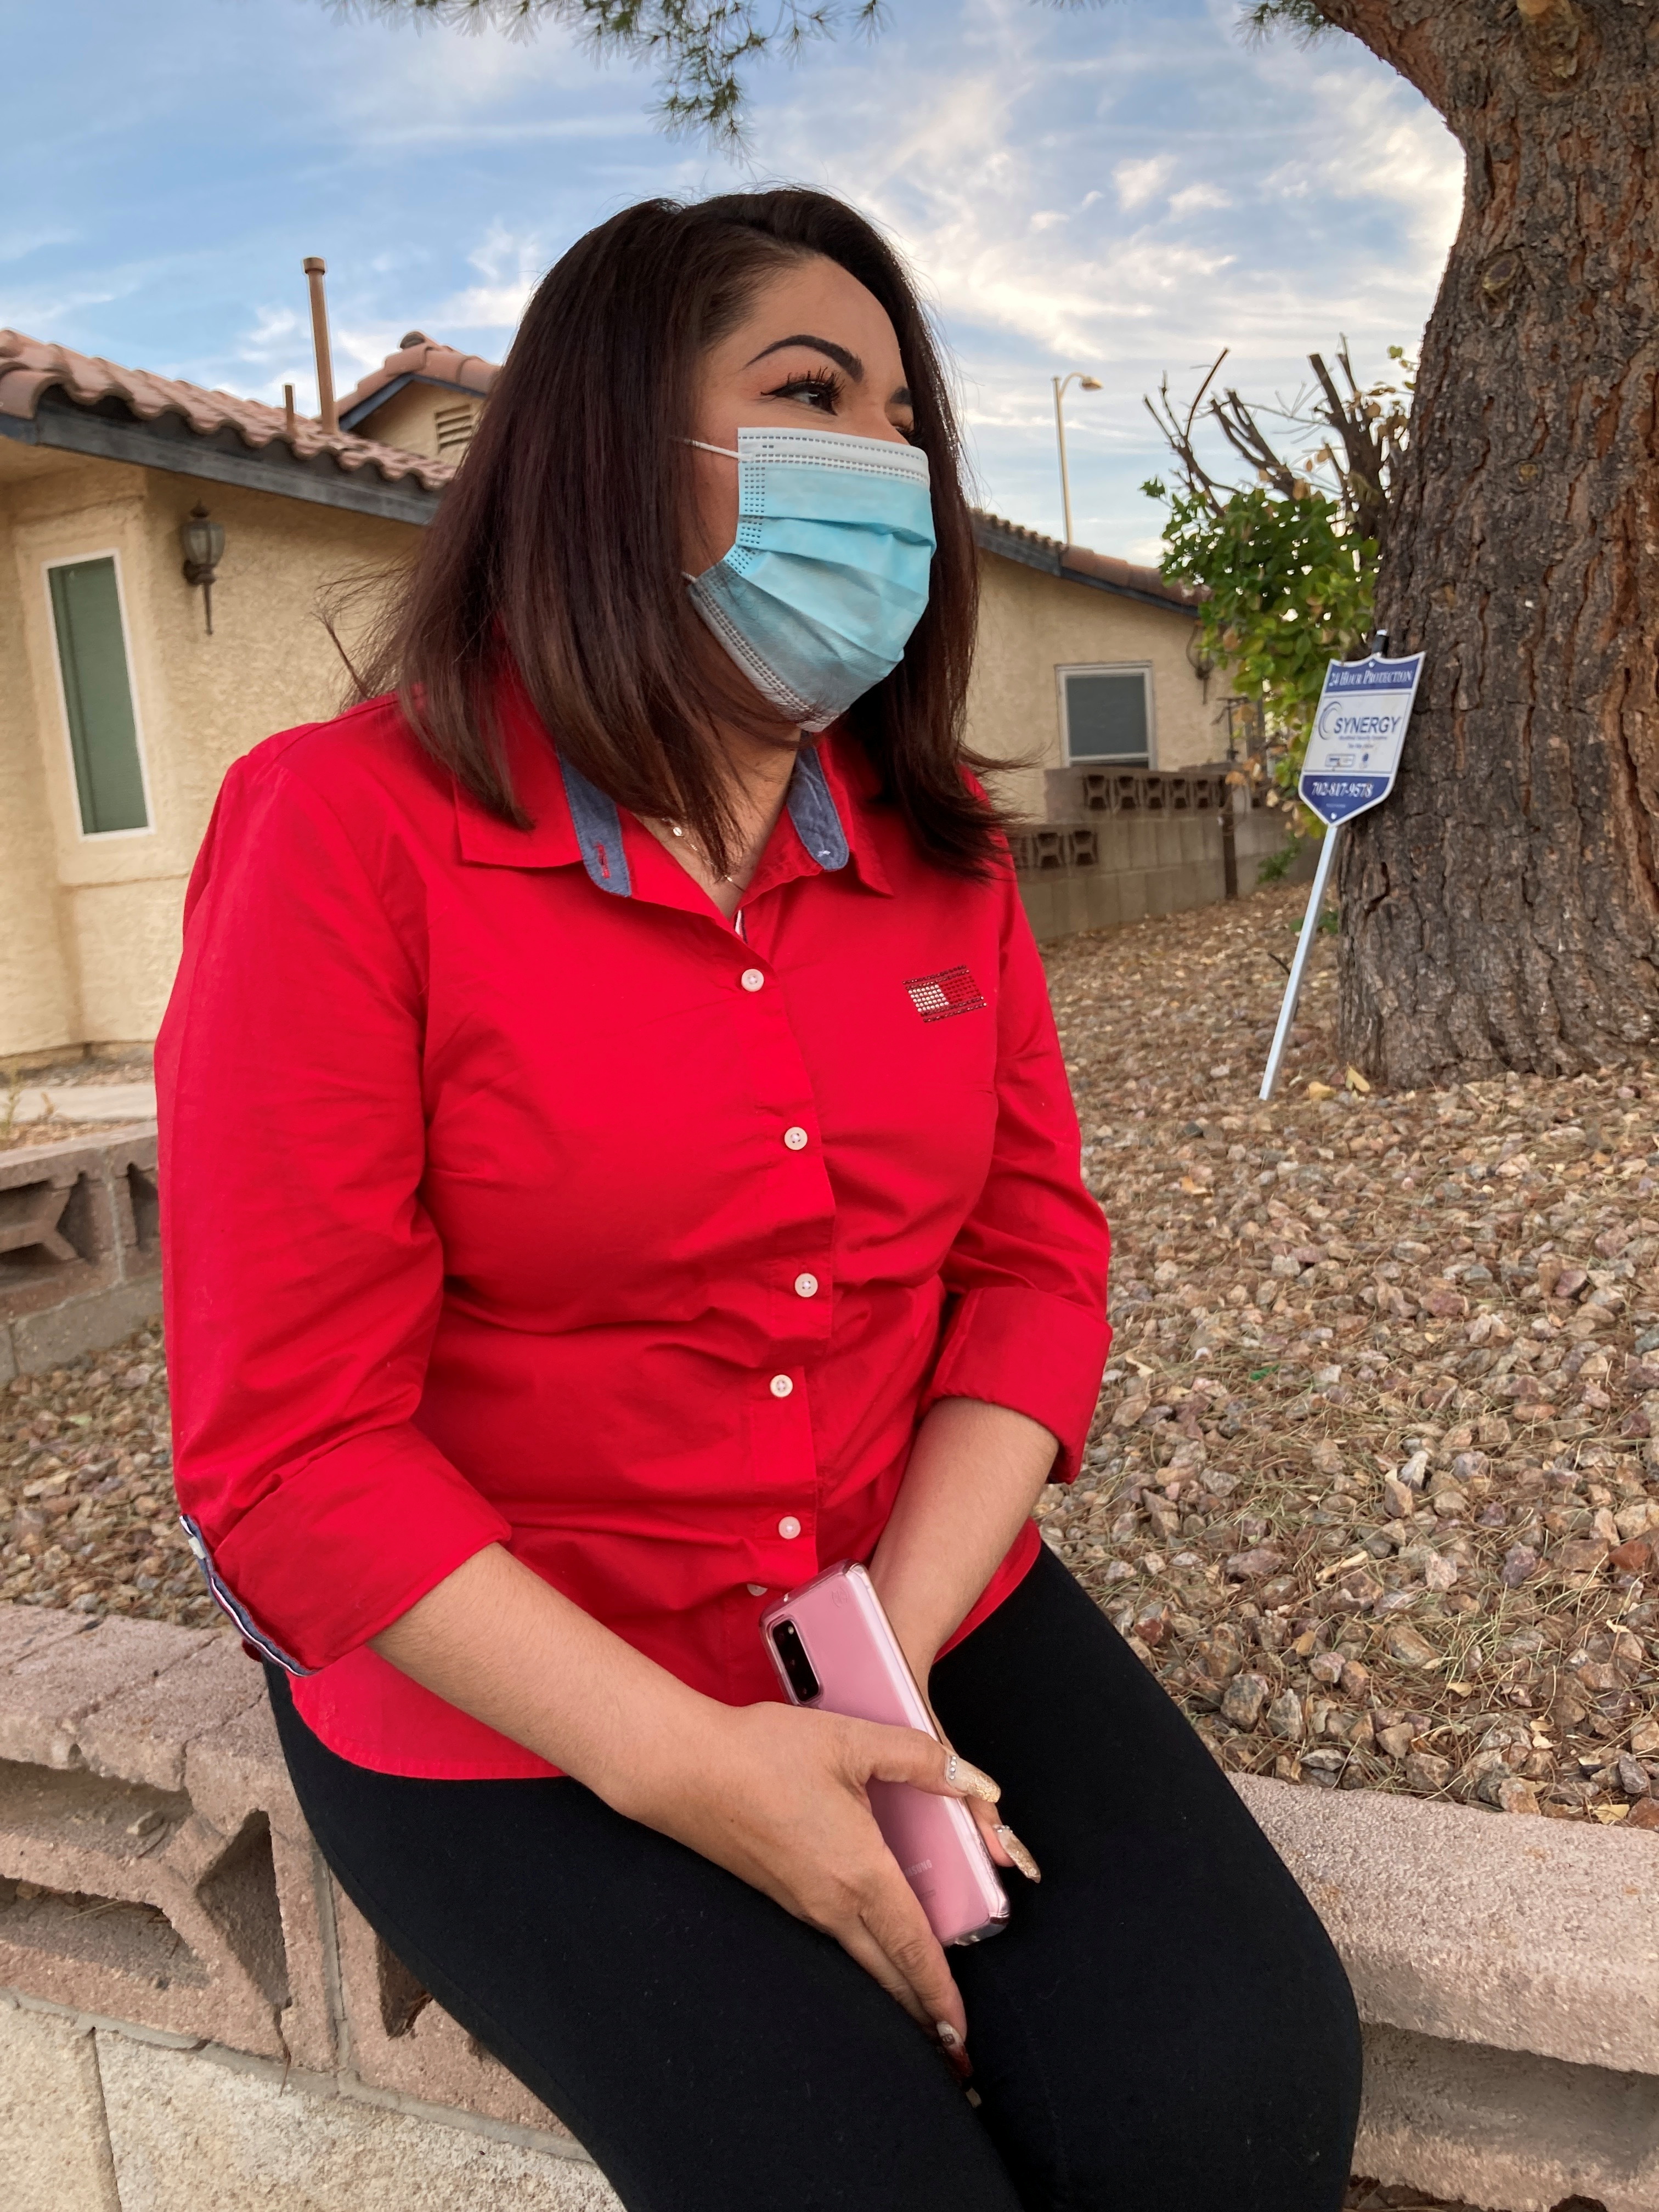 Cristina Lopez Garcia, 36, who has been unemployed since March when the Las Vegas casino she worked at as a cook's assistant shut down because of the coronavirus disease (COVID-19) outbreak, poses in this undated handout photo.  The Culinary Union/Handout via REUTERS  